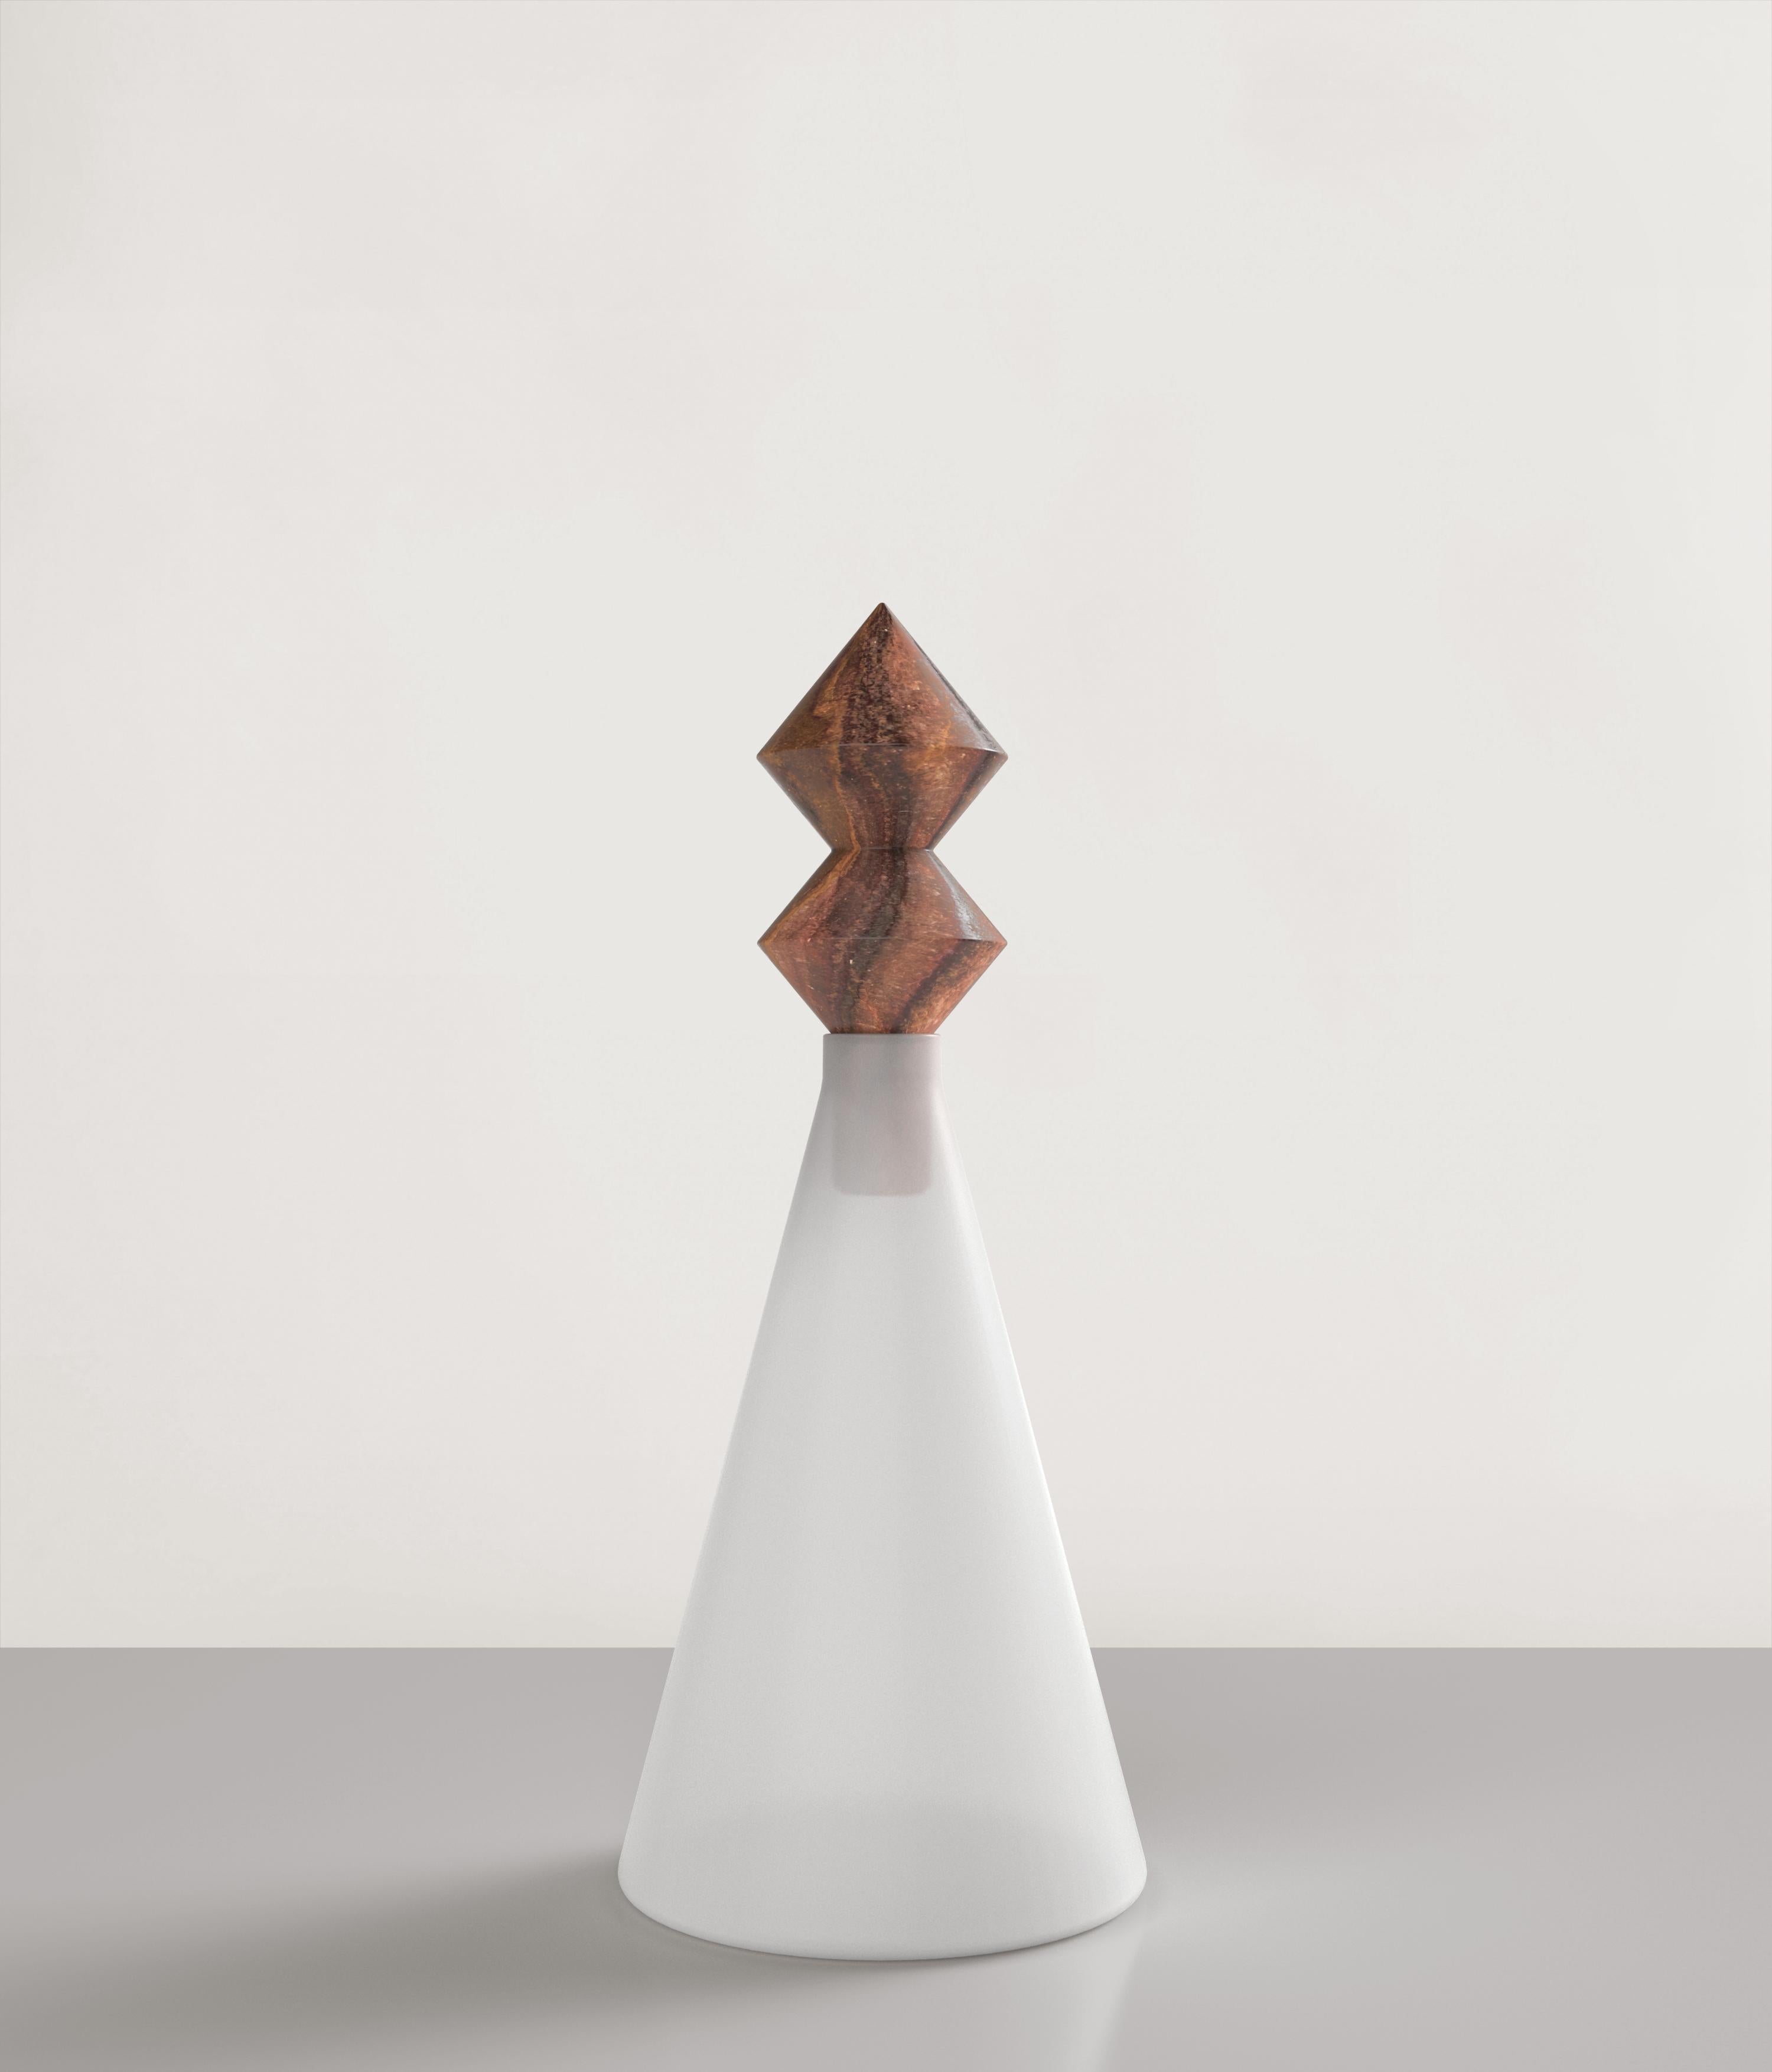 Kite V2 is a 21st century bottle made by Italian artisans in sanded white glass and miele Onyx. It is part of the collectible design language Kite that has been developed by the Edizione Limitata's art research team in Milan. The top is designed as